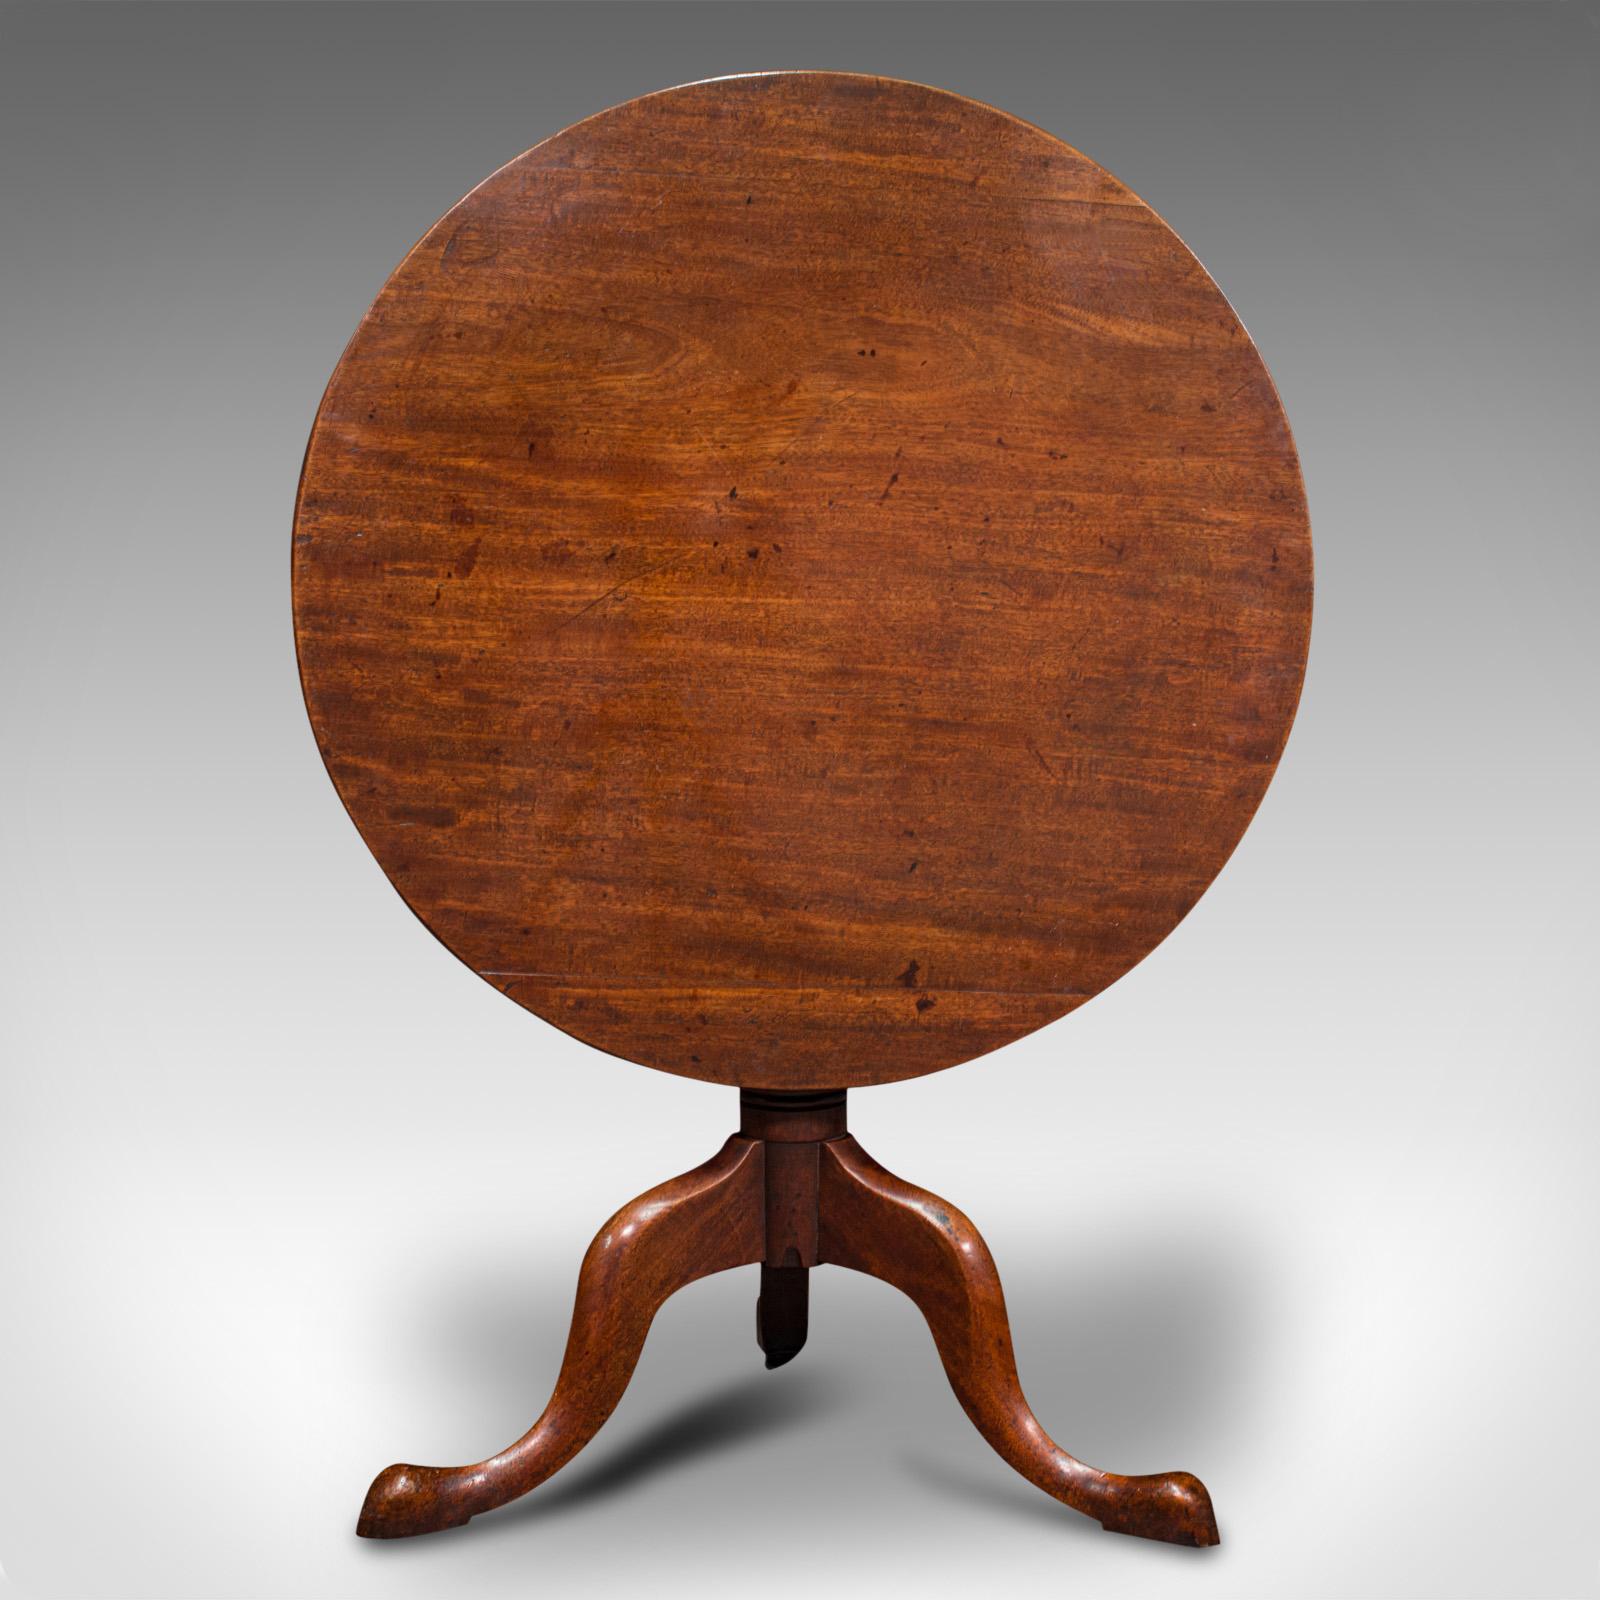 This is an antique tilt top table. An English, mahogany lamp or wine table with tripod base, dating to the Georgian period, circa 1770.

Delightful example of quality Georgian craftsmanship
Displays a desirable aged patina and in good antique